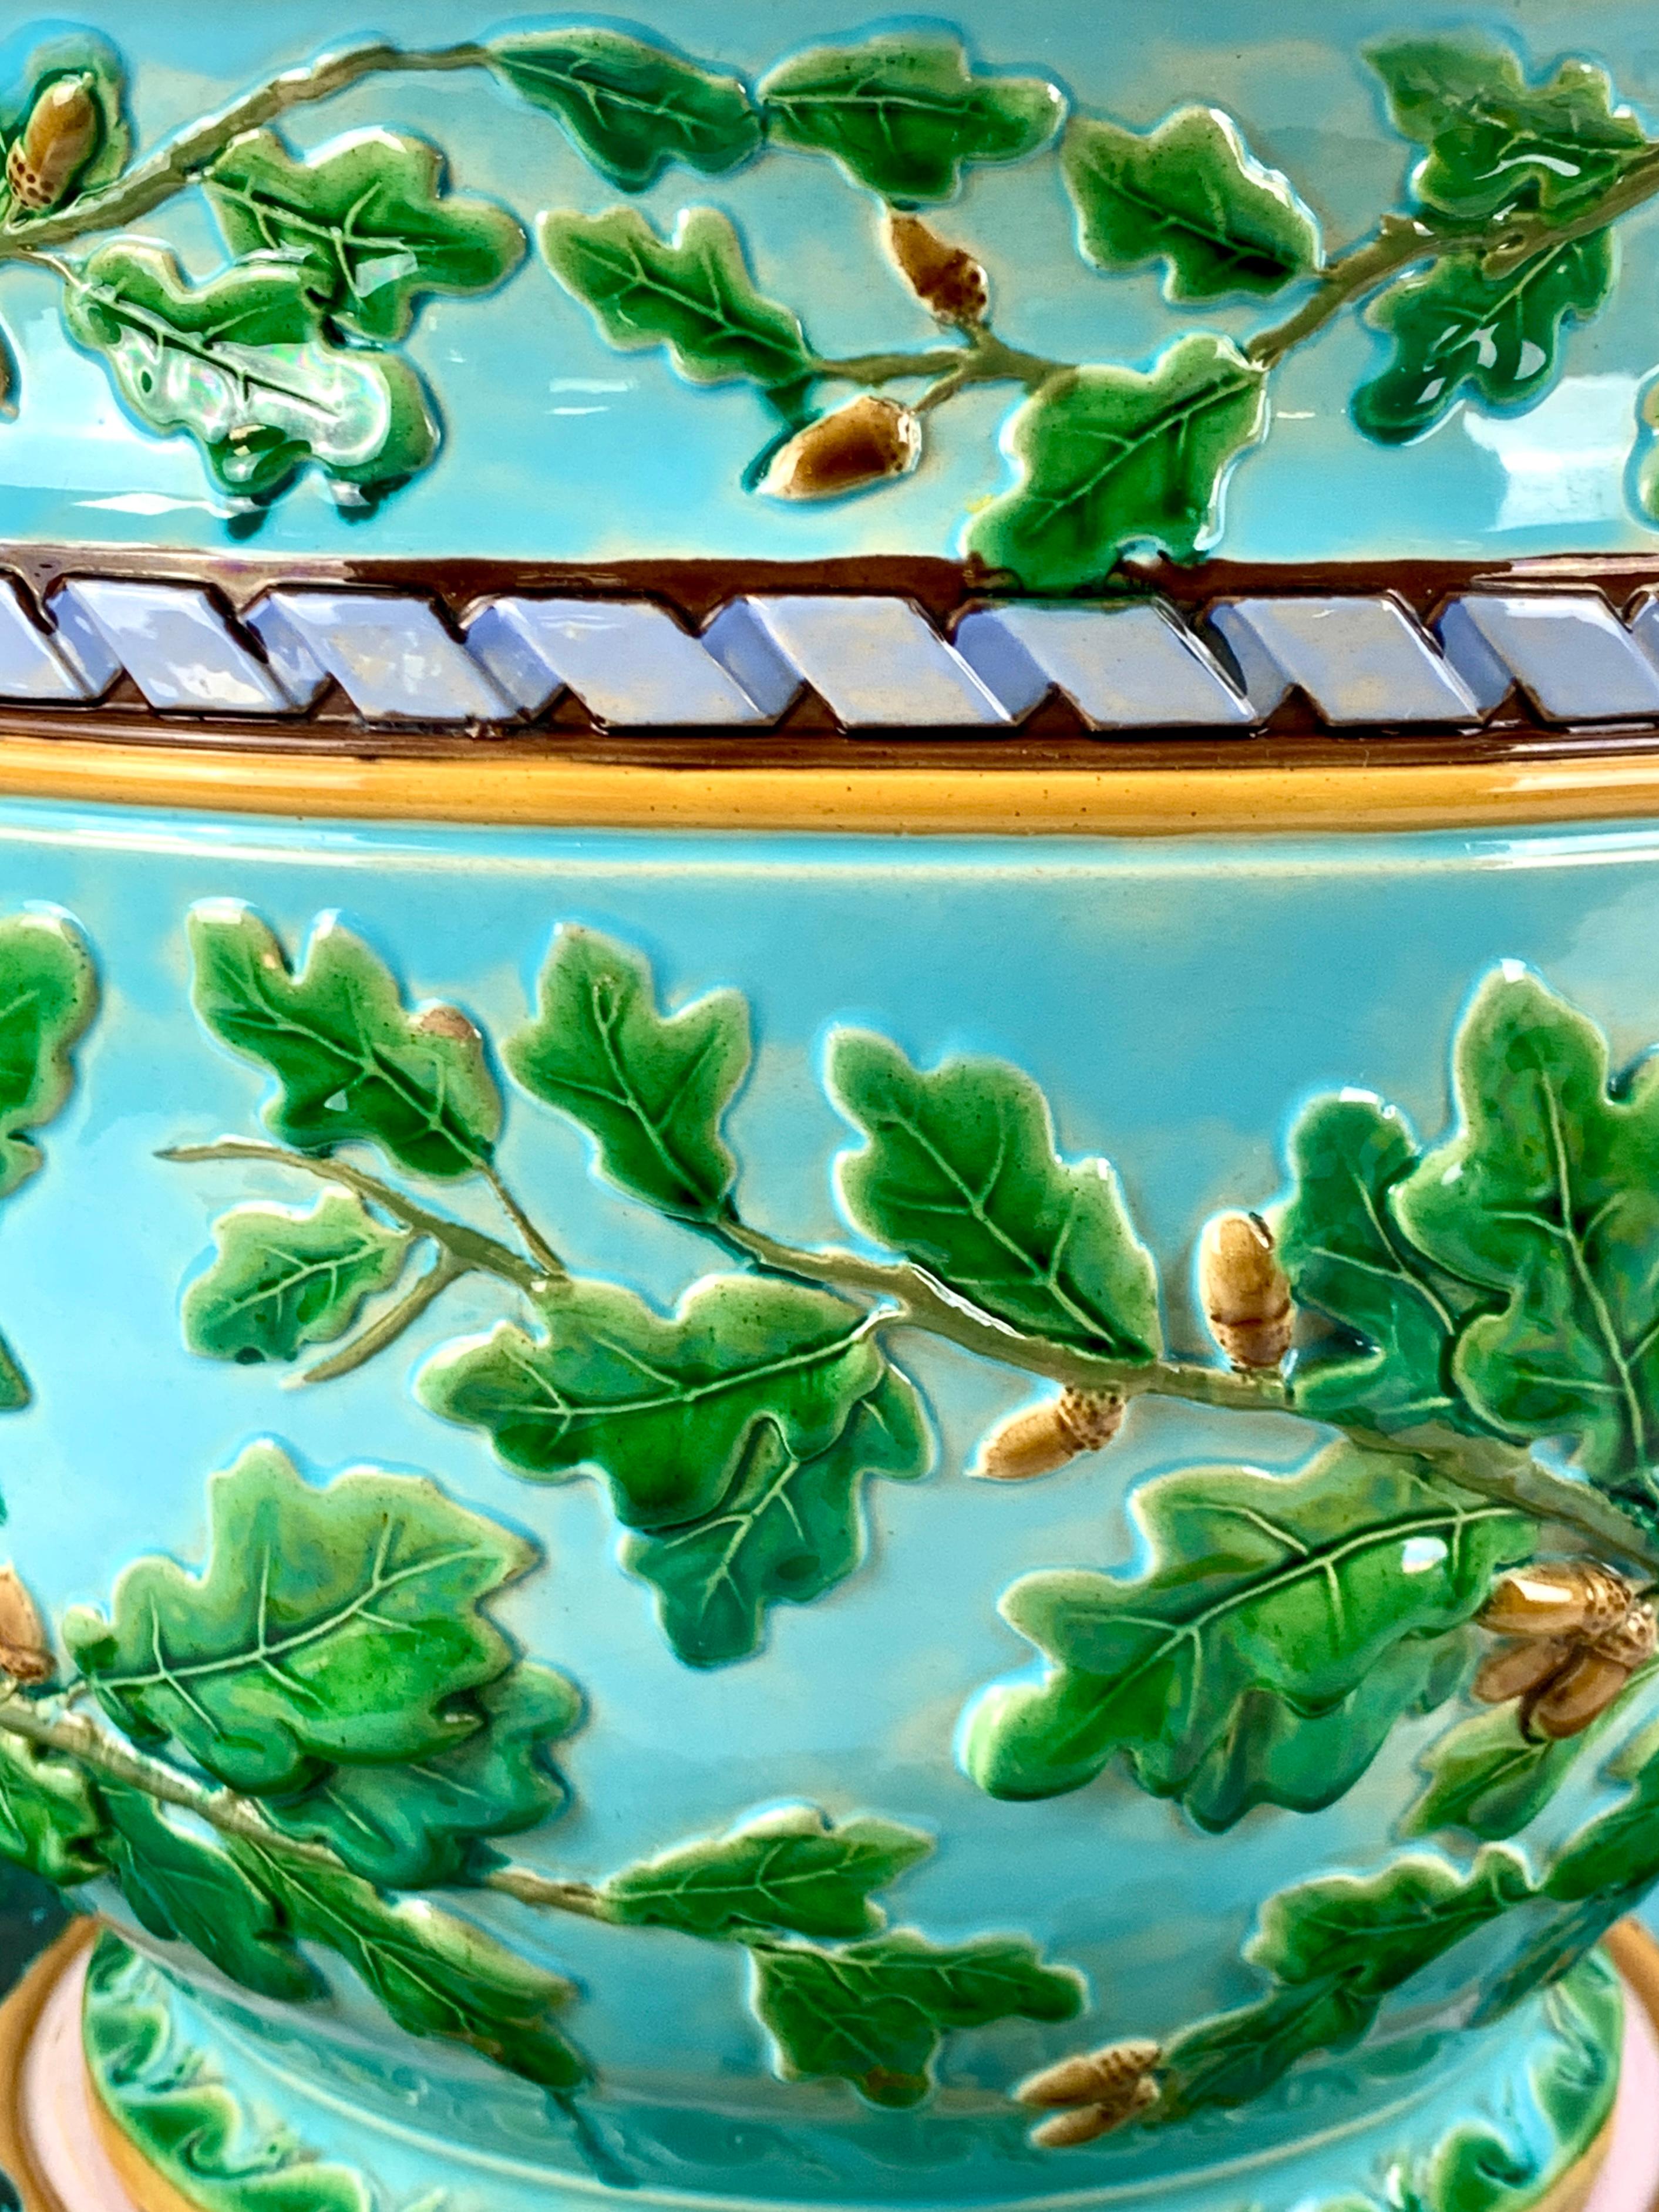 This exquisite 19th-century majolica jardiniere and underplate by Minton was handpainted in Stoke-upon-Trent, Staffordshire, England, around 1880. This jardiniere measures an impressive 17